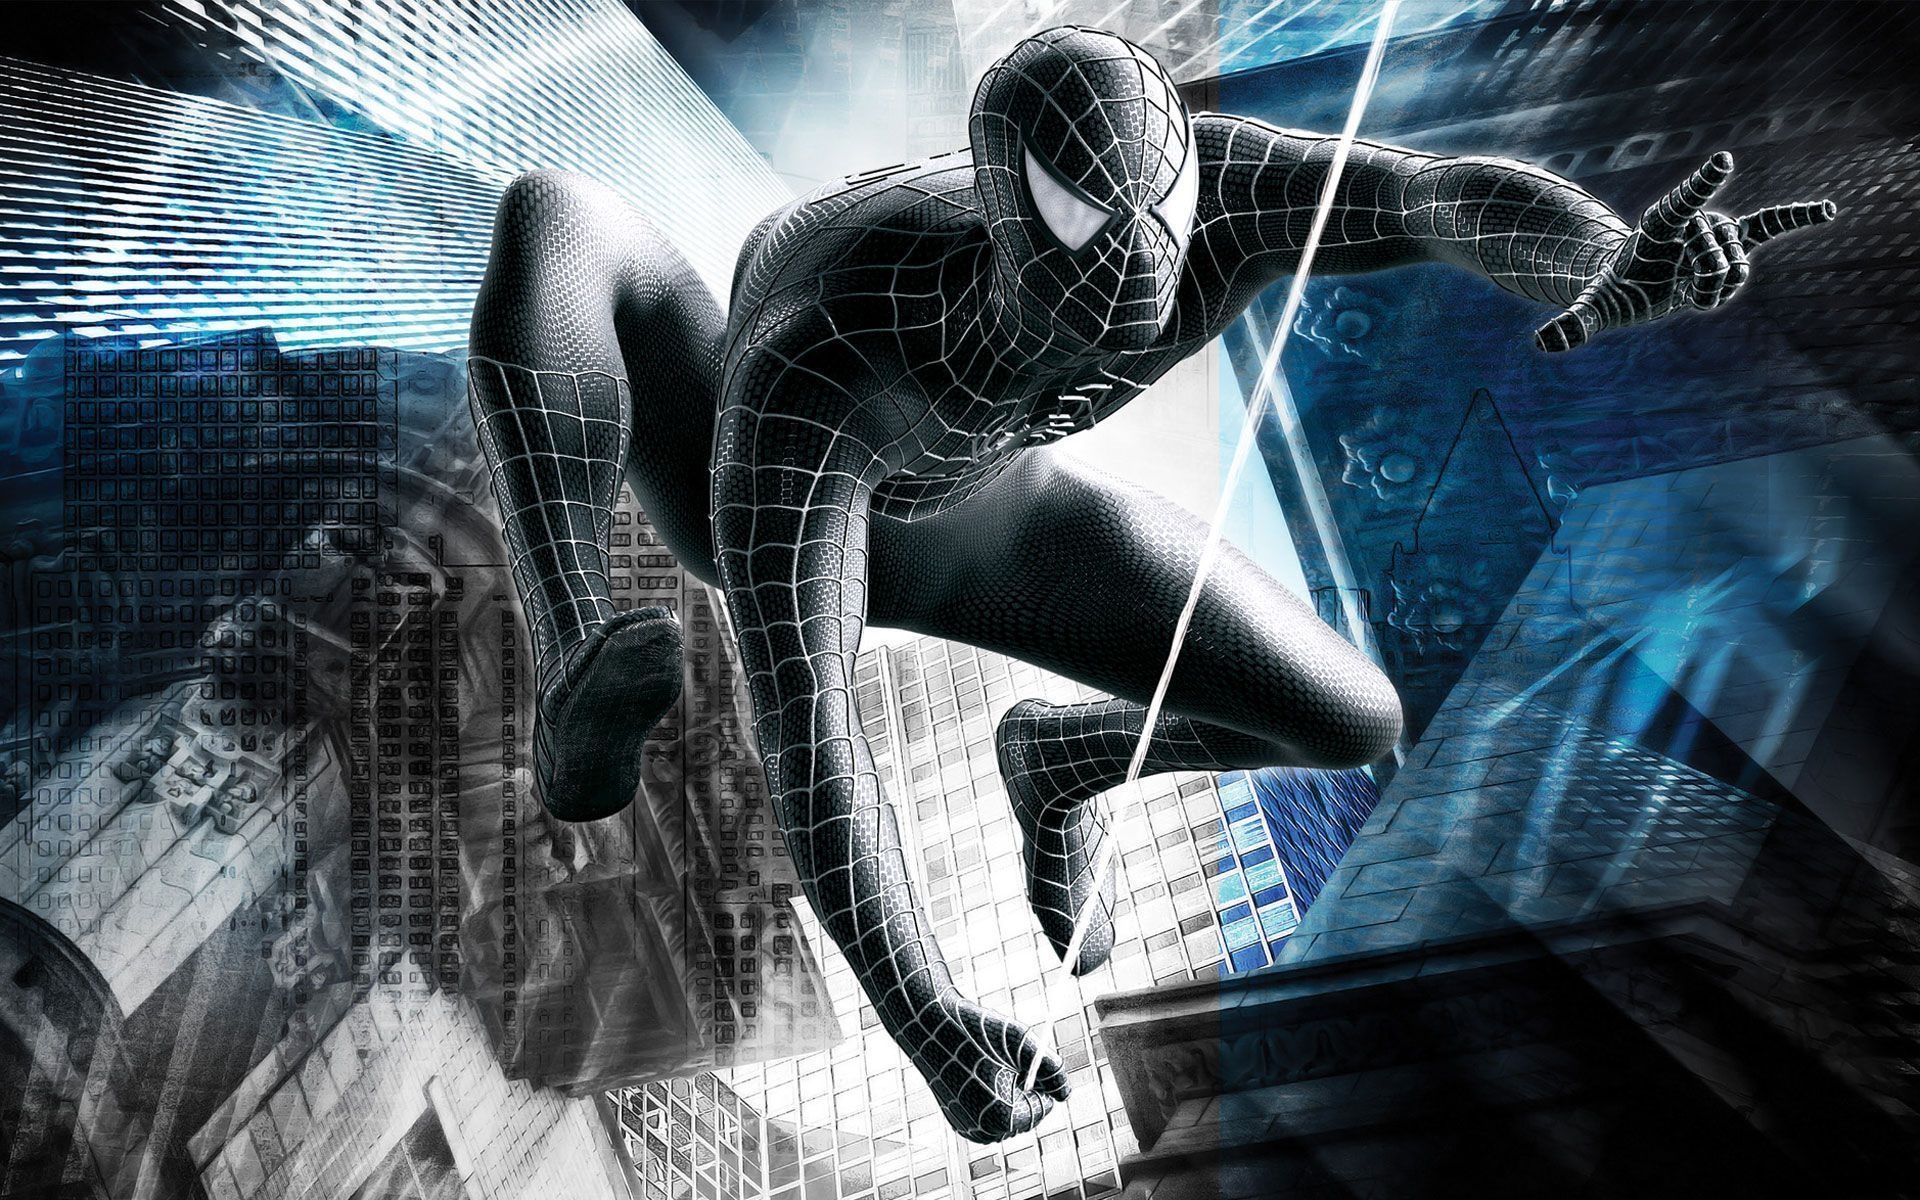 Black Spiderman wallpapers, Spiderman pictures, Black Spiderman, Spiderman images, 1920x1200 HD Desktop